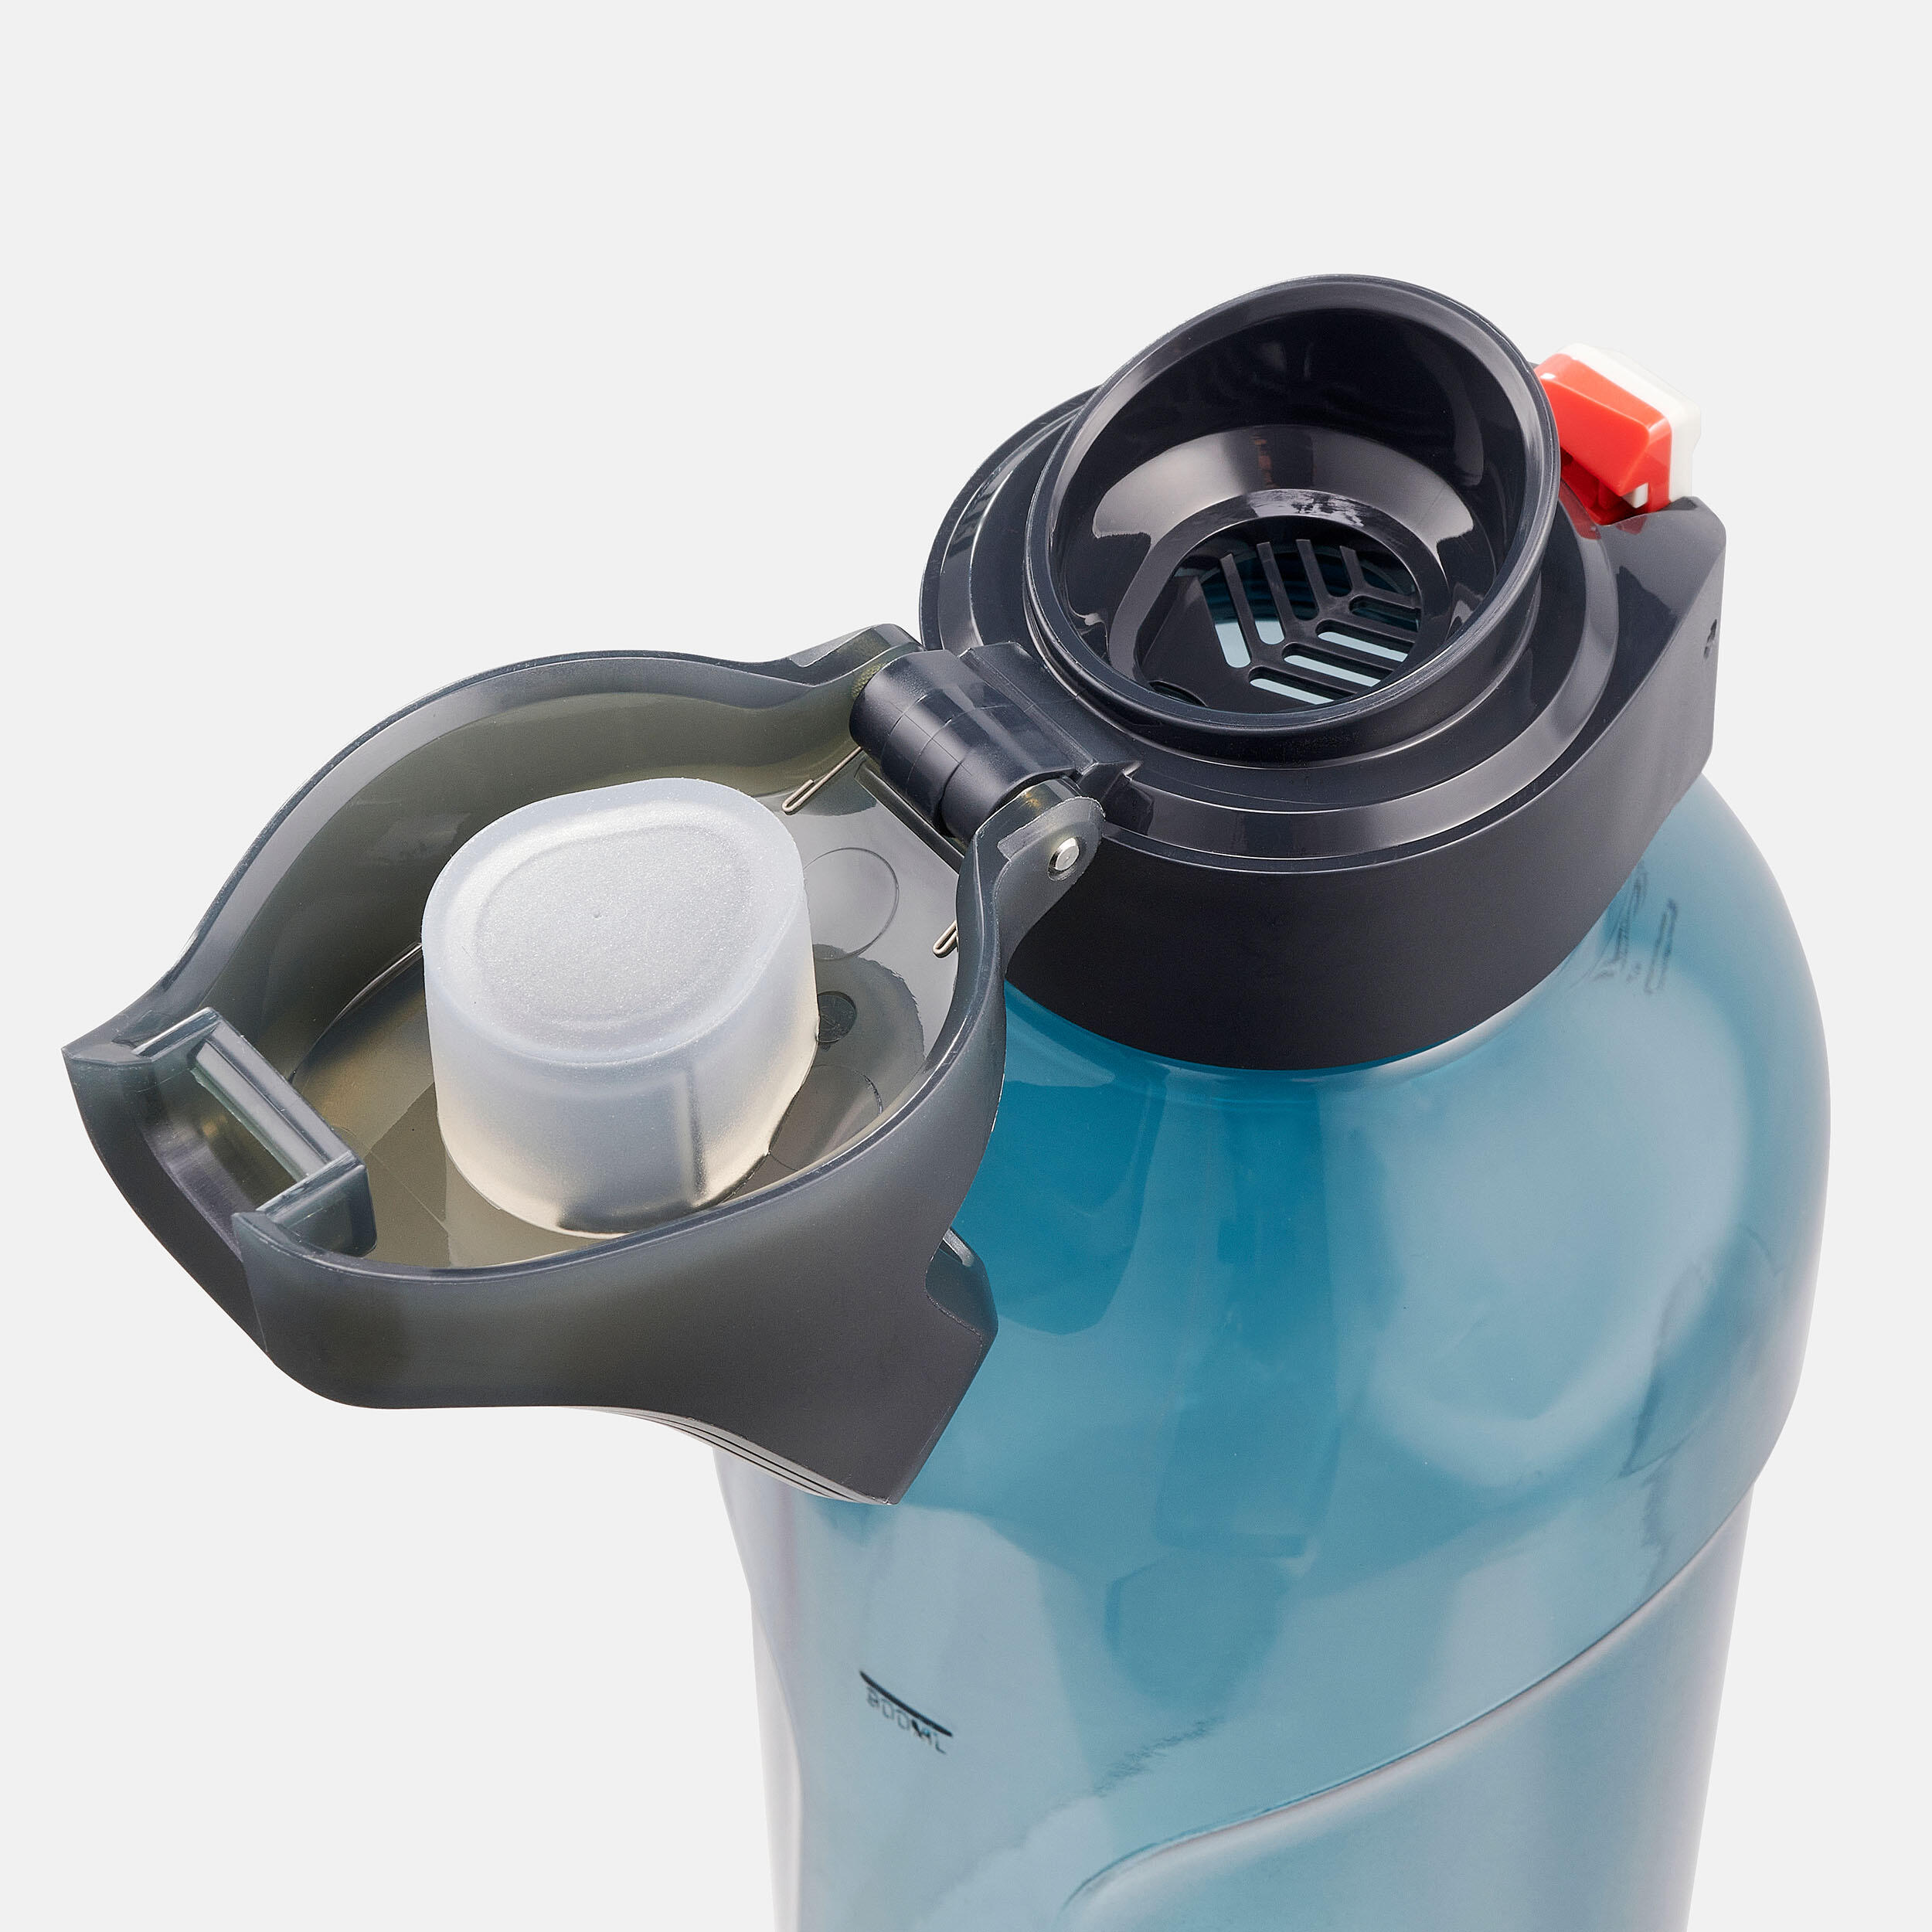 Ecozen® Flask 1.2 L with quick opening cap for hiking 9/13